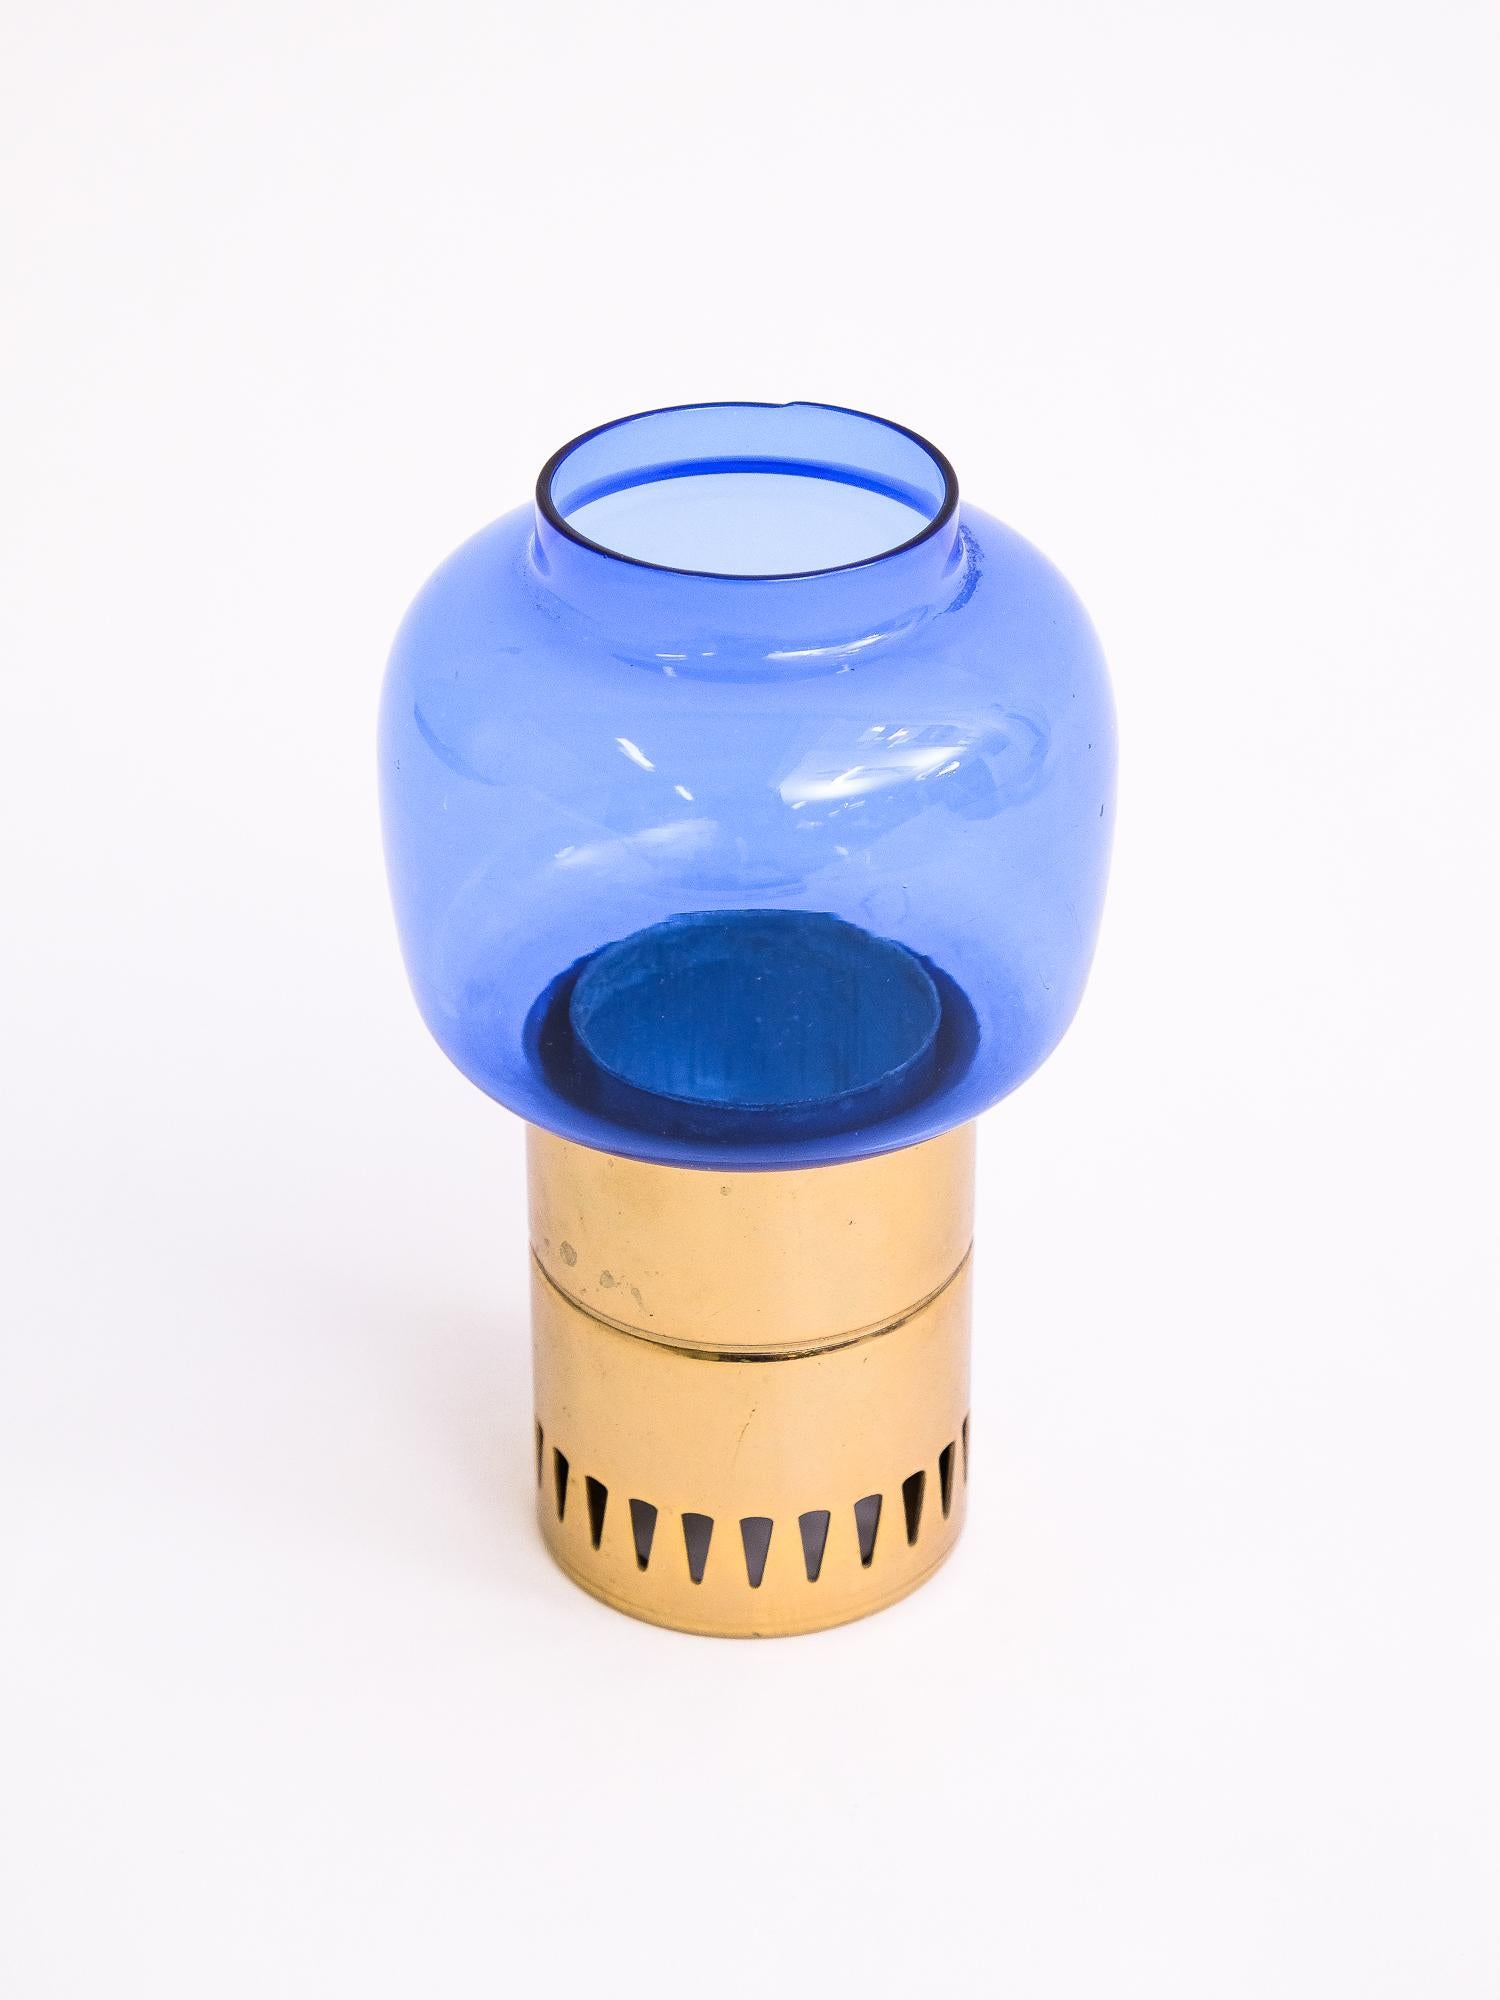 Beautiful candleholder by Hans-Agne Jakobsson made of blue glass and brass base.
Measurements: Diameter 8cm, height 13cm

Very nice condition.